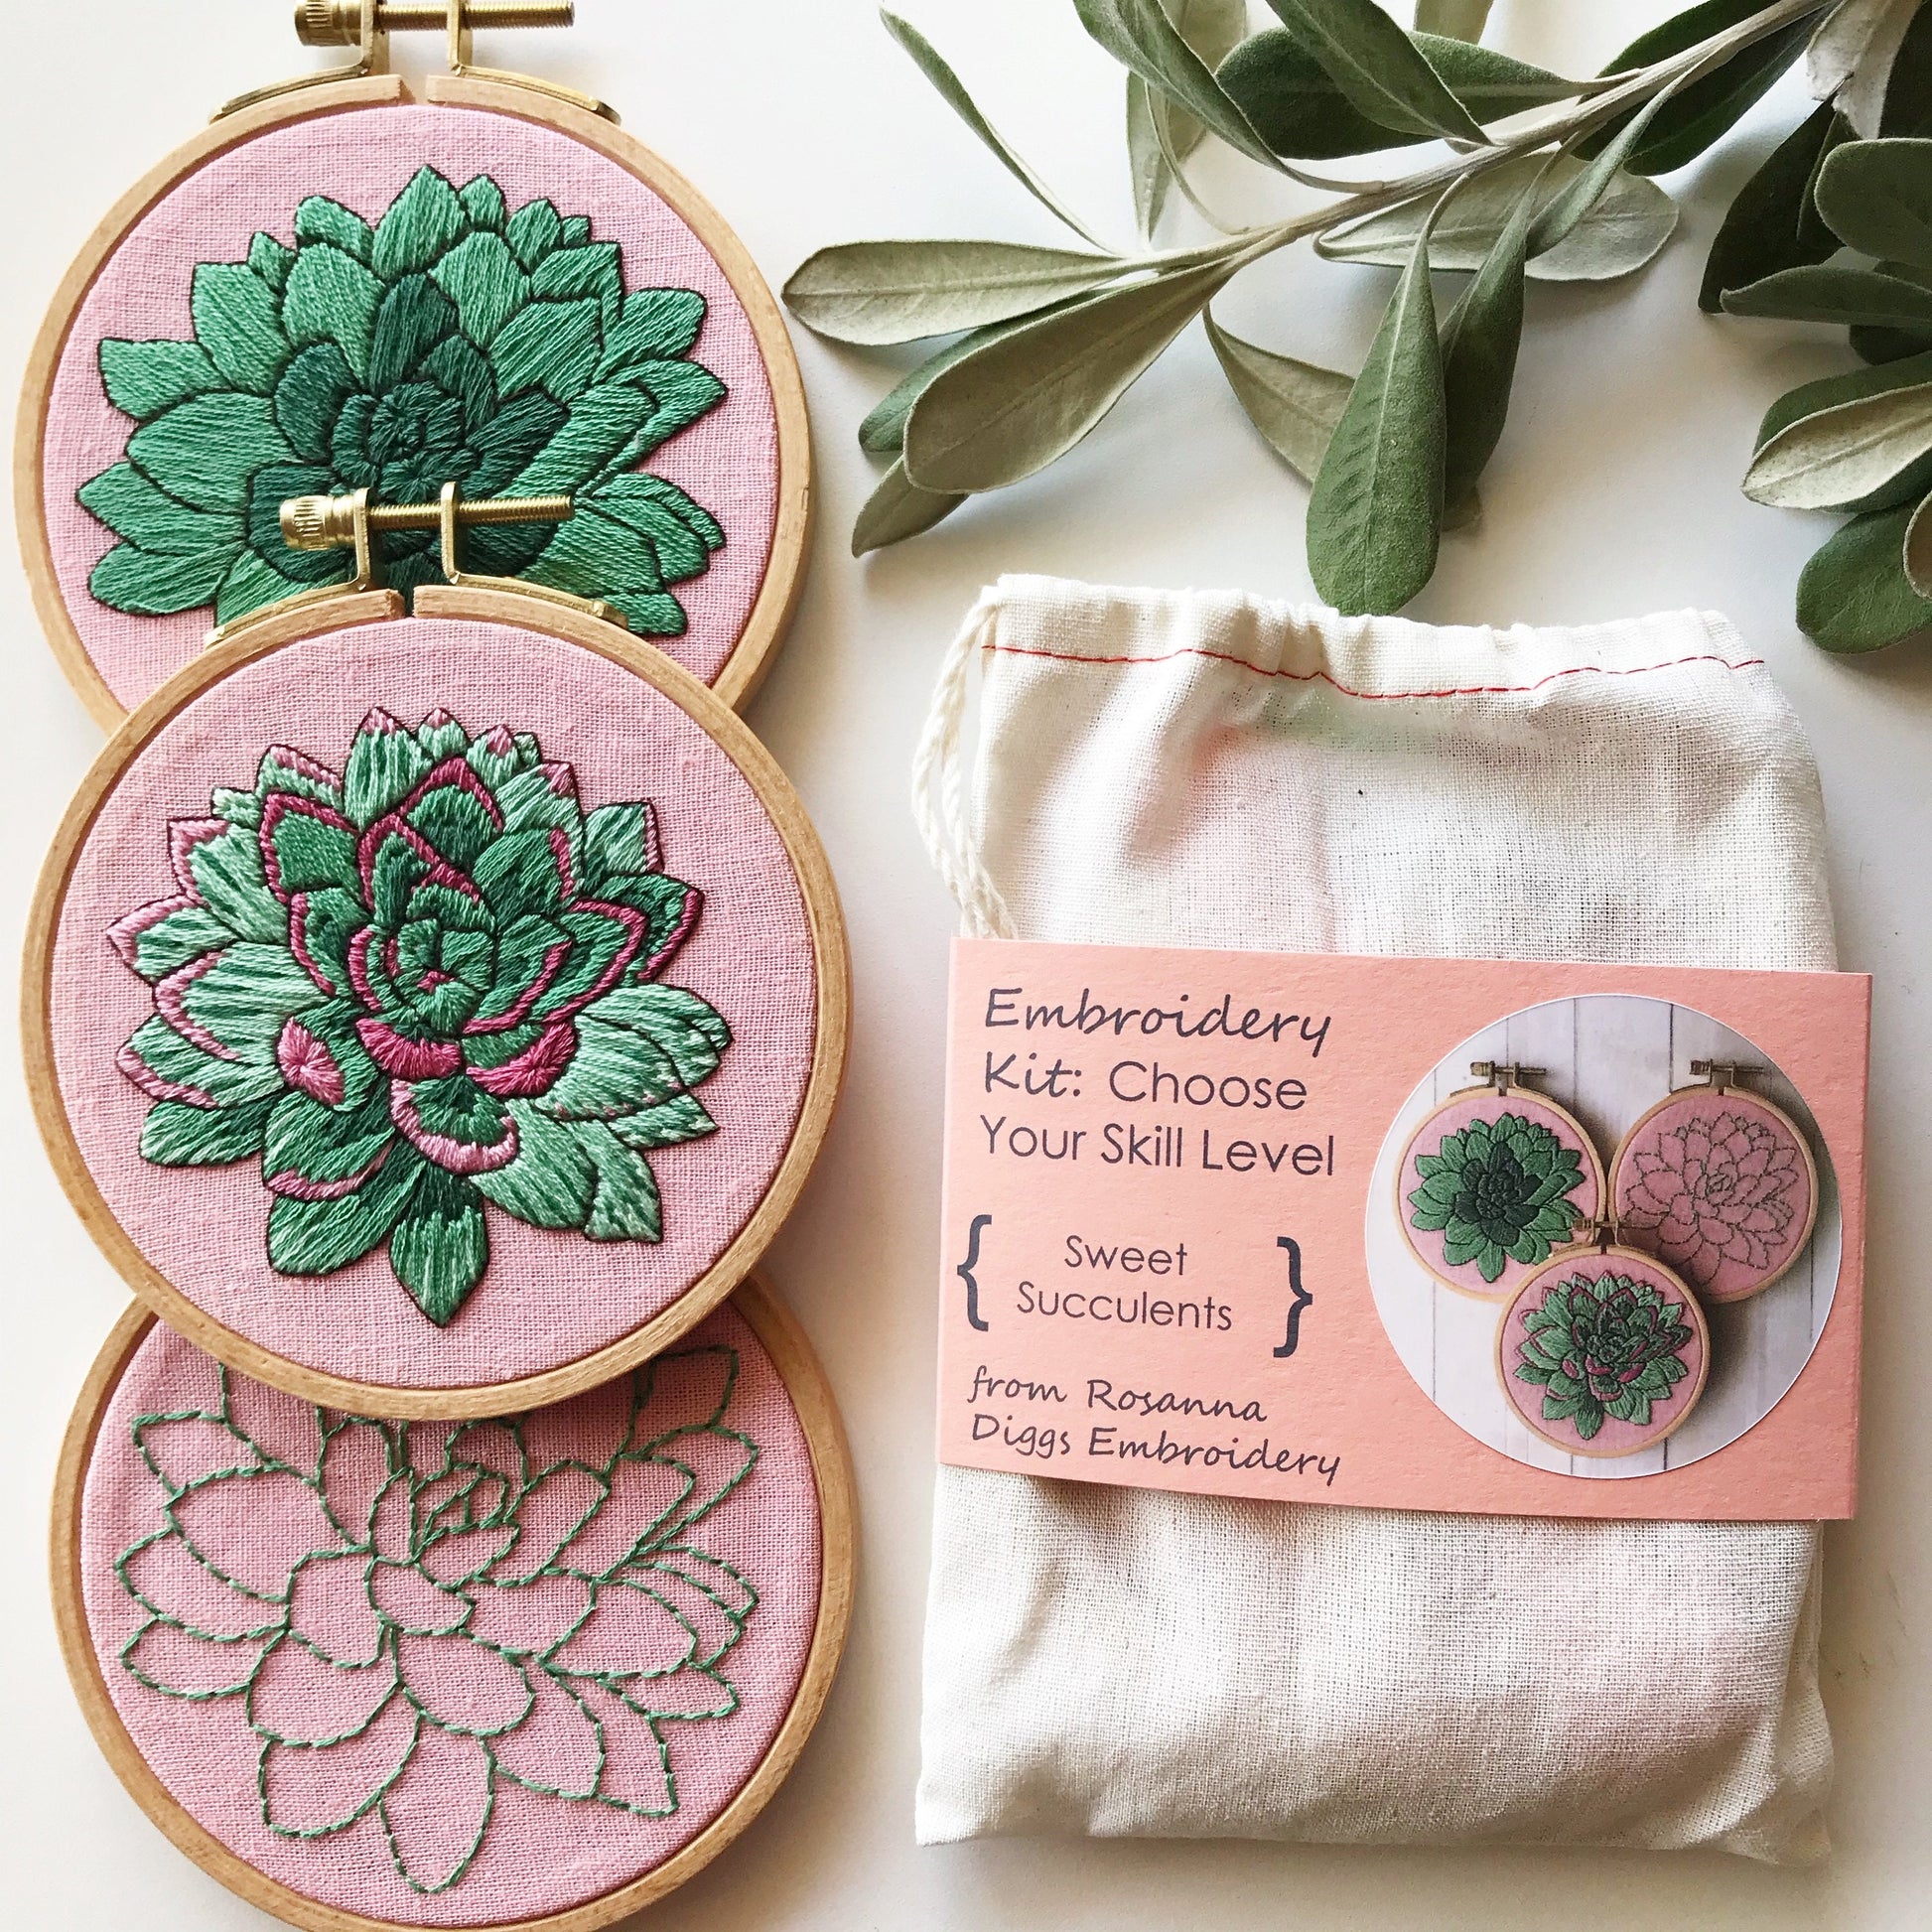 Embroidery, Quilting and crafting supplies for all your needlework